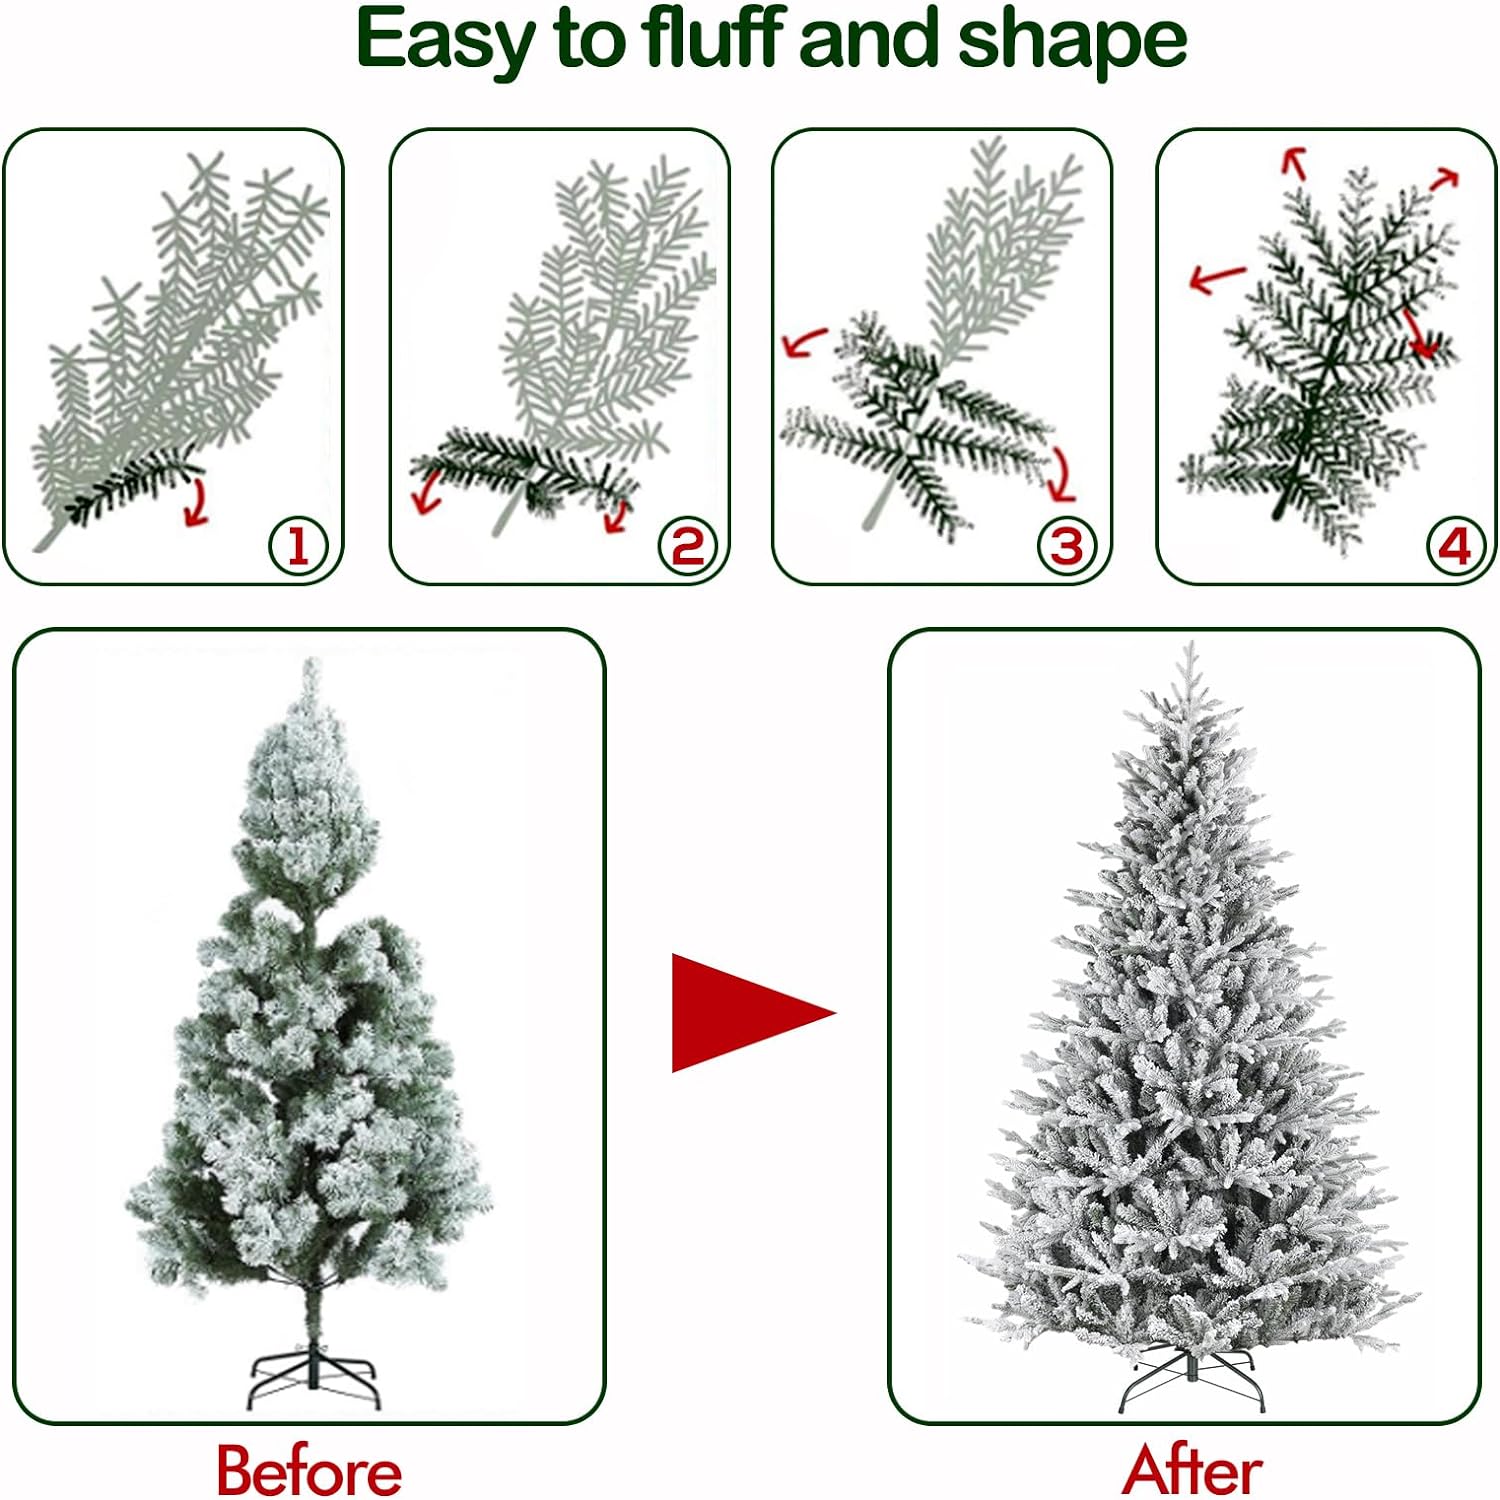 Hykolity 6.5'/7.5' Premium Prelit Snow Flocked Christmas Tree with Warm White LED Lights, Branch Tips, Metal Stand and Hinged Branches